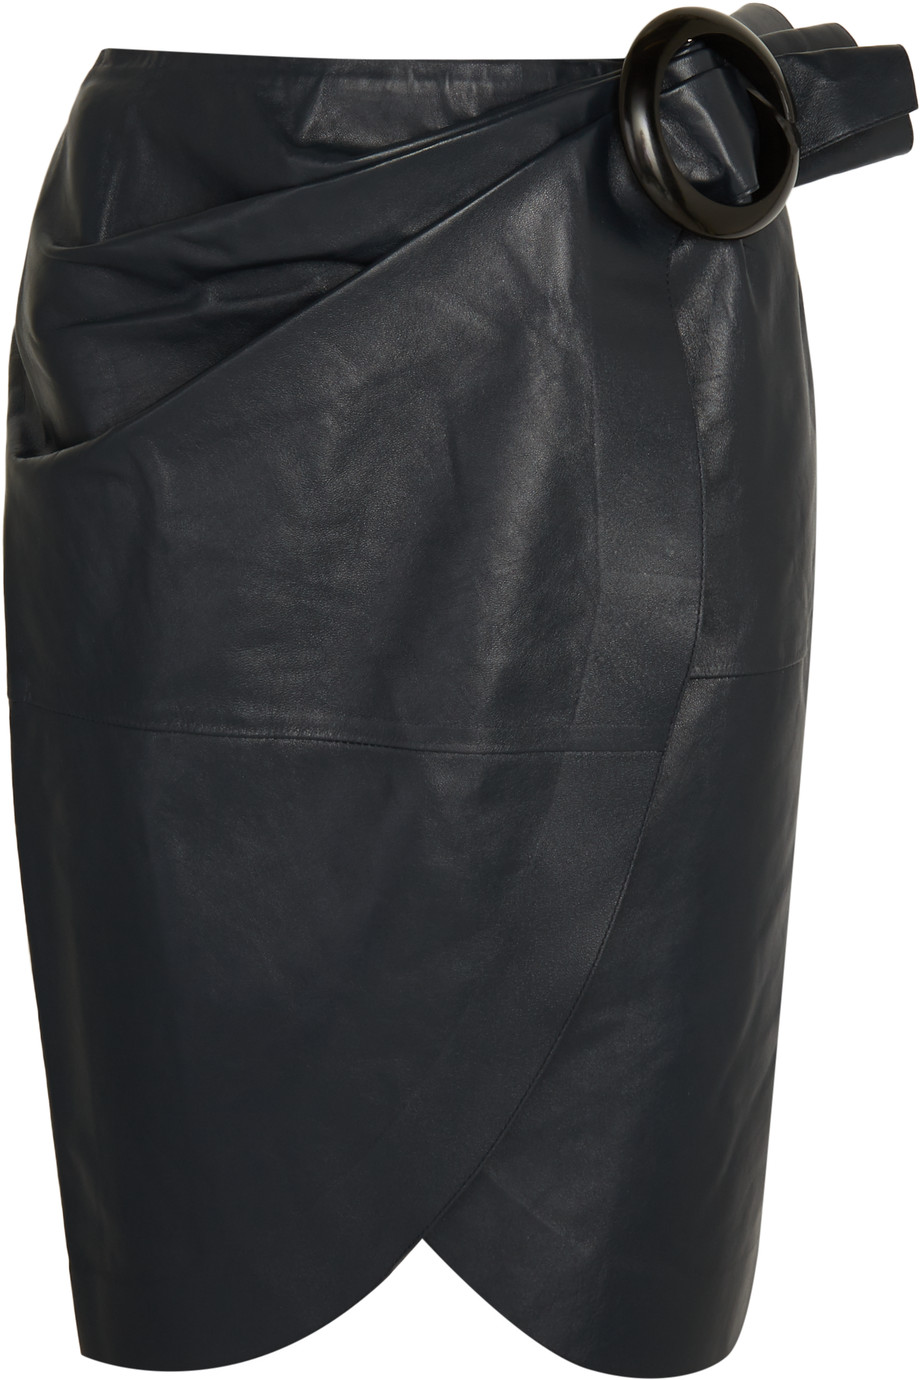 Jw Anderson Buckled Leather Wrap Skirt | ModeSens